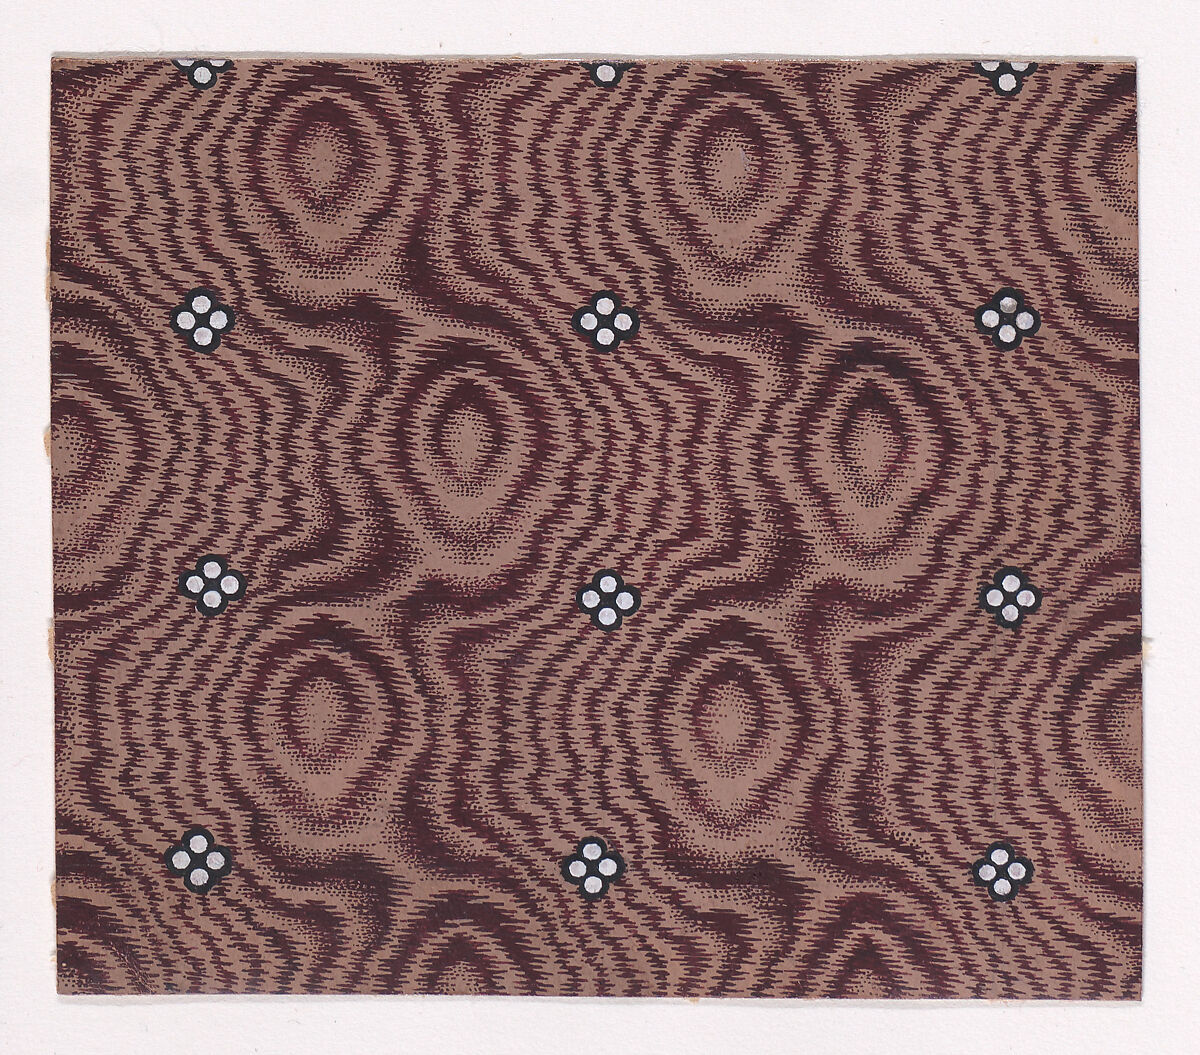 Textile Design with Rows of Quatrefoils of Pearls over an Abstract Background Simulating Tie-Dye, Anonymous, Alsatian, 19th century, Gouache 